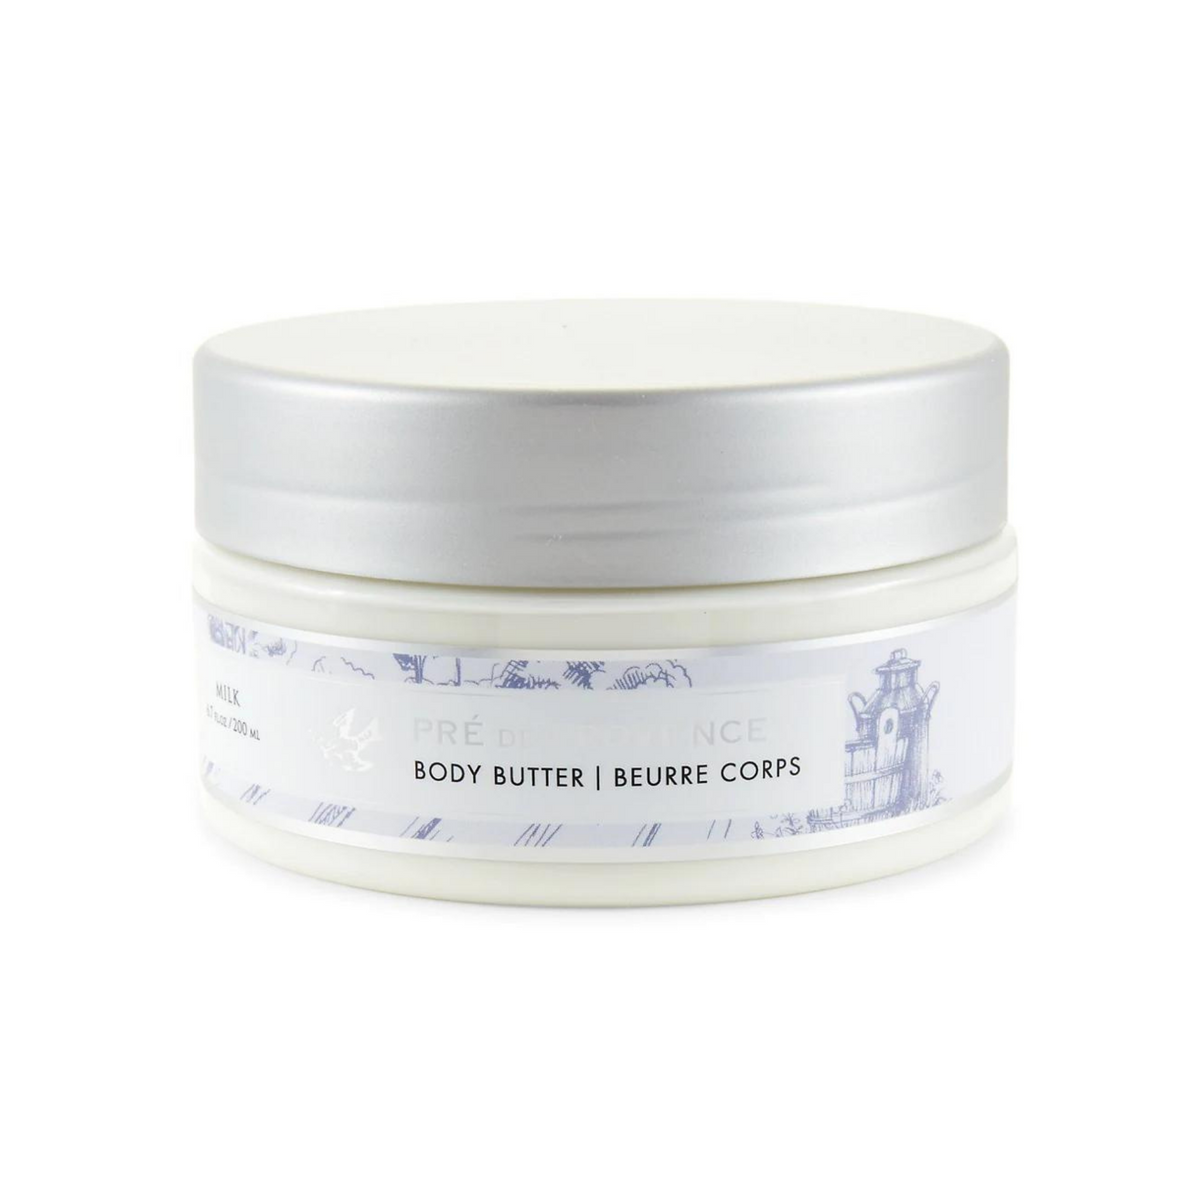 Primary Image of Body Butter- Milk